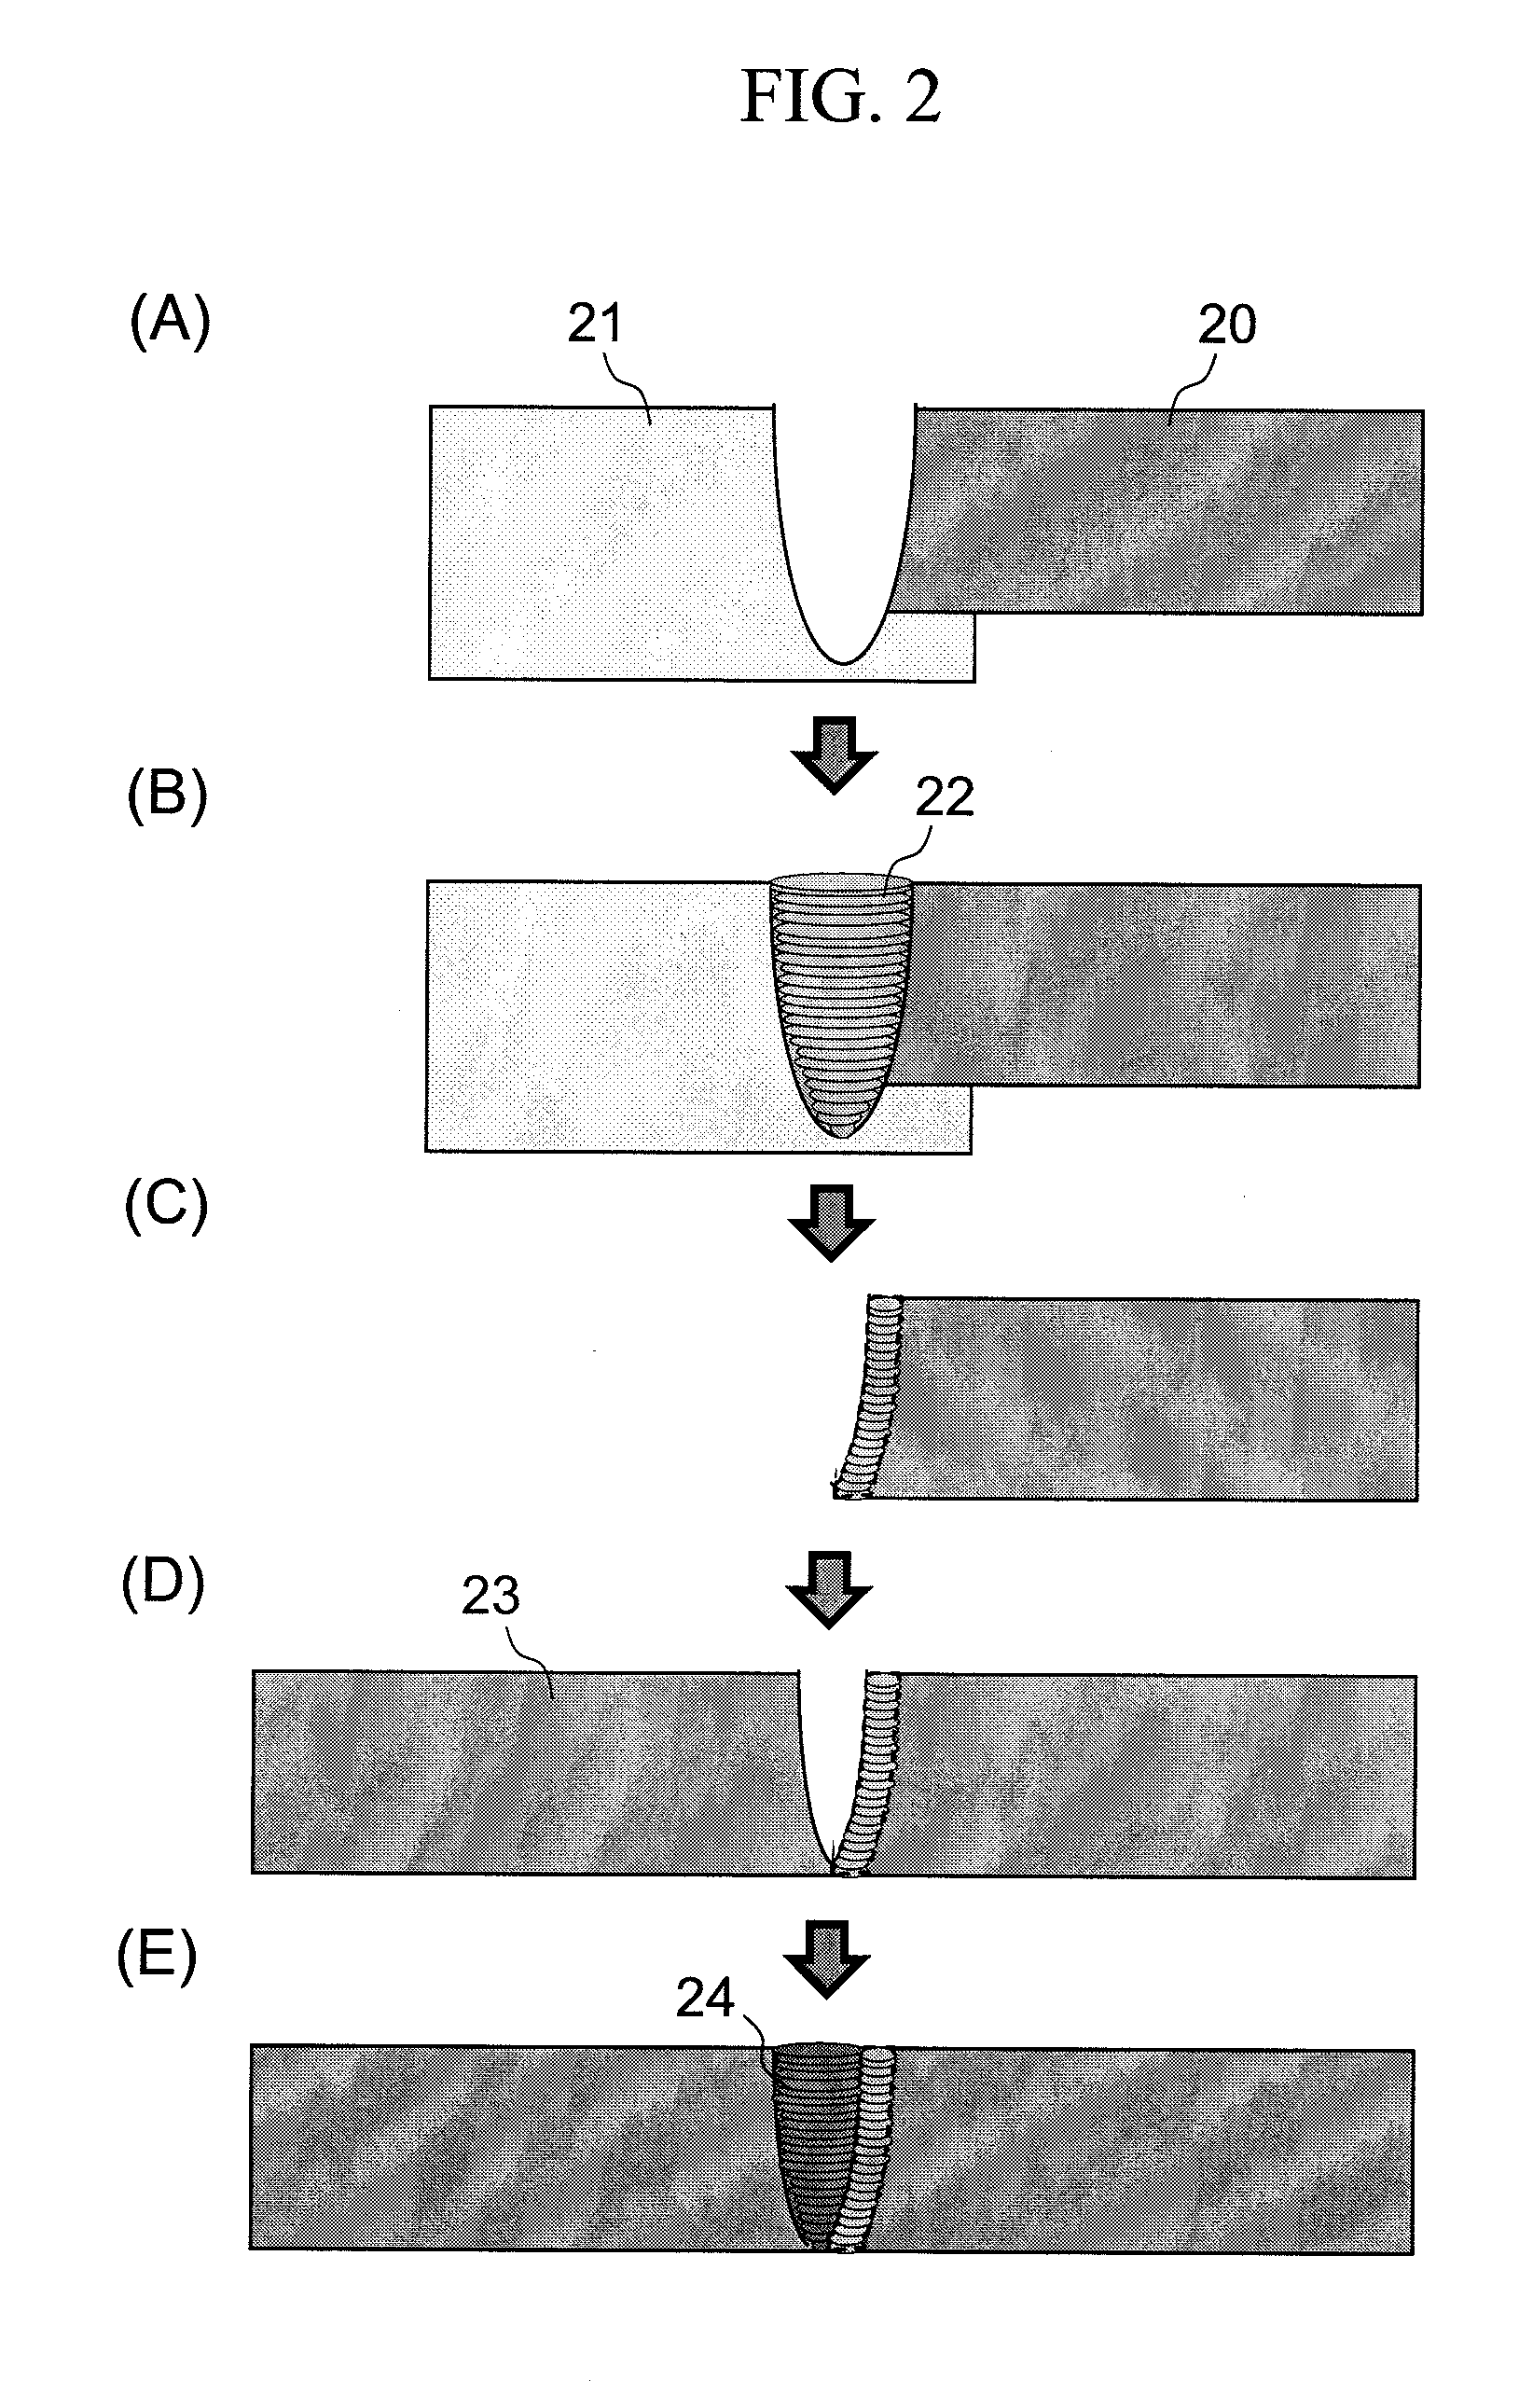 Dissimilar metal welds and its manufacturing method of large welded structures such as the turbine rotor